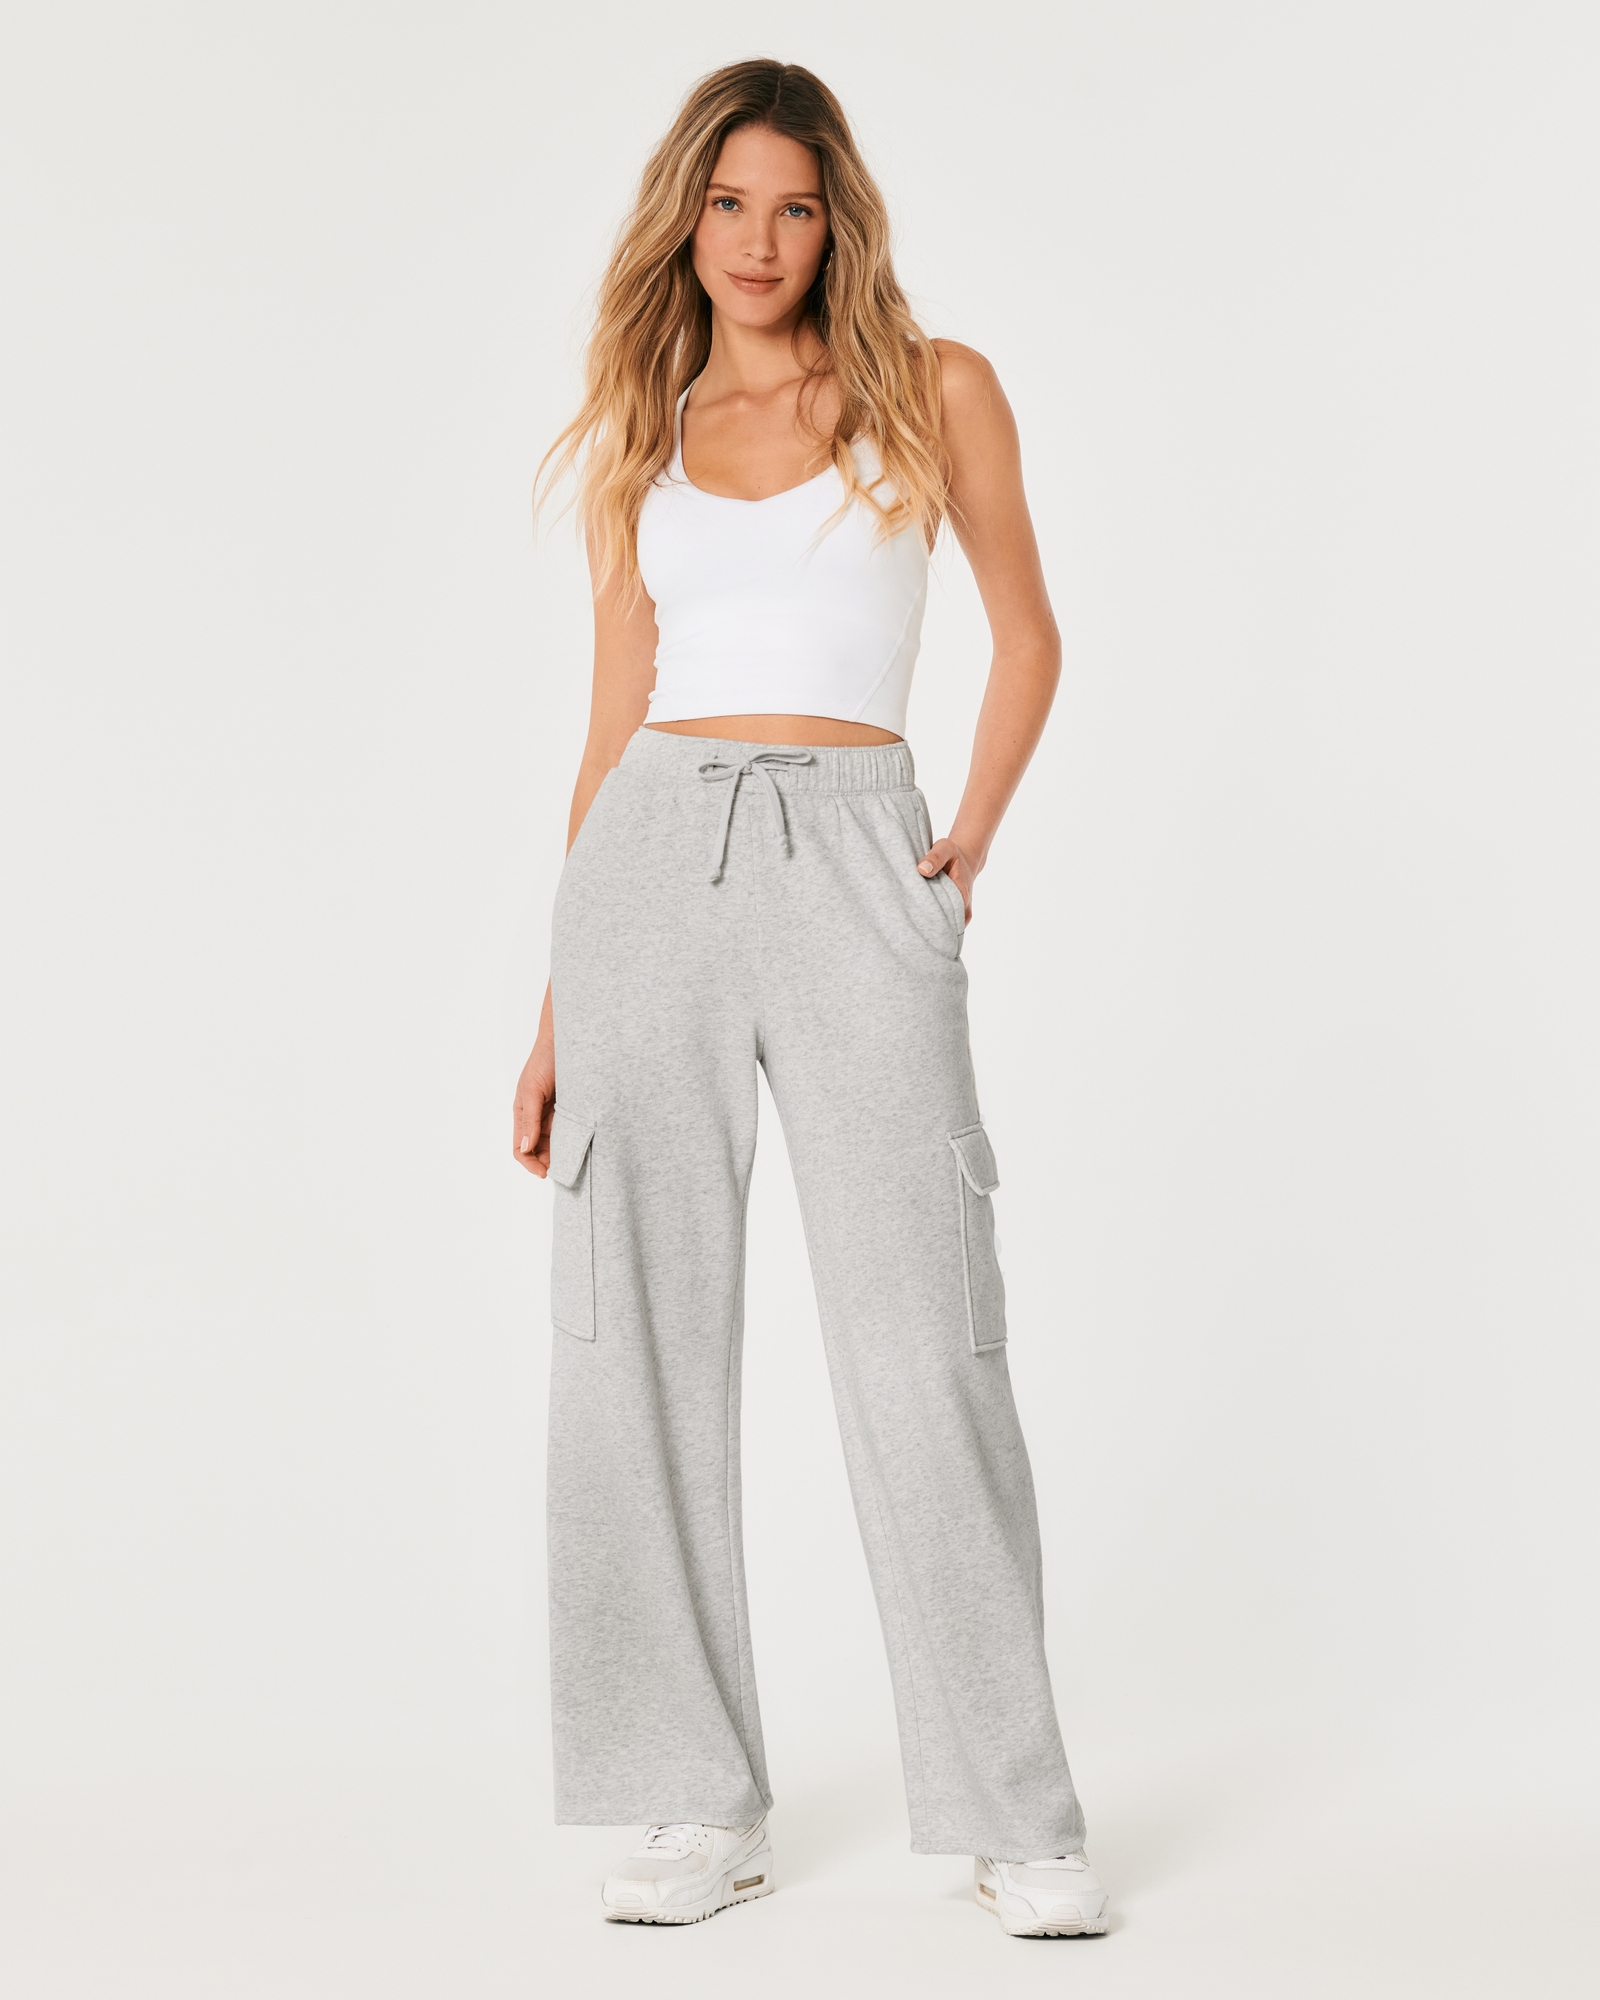 https://img.hollisterco.com/is/image/anf/KIC_519-3041-0123-112_model1.jpg?policy=product-extra-large